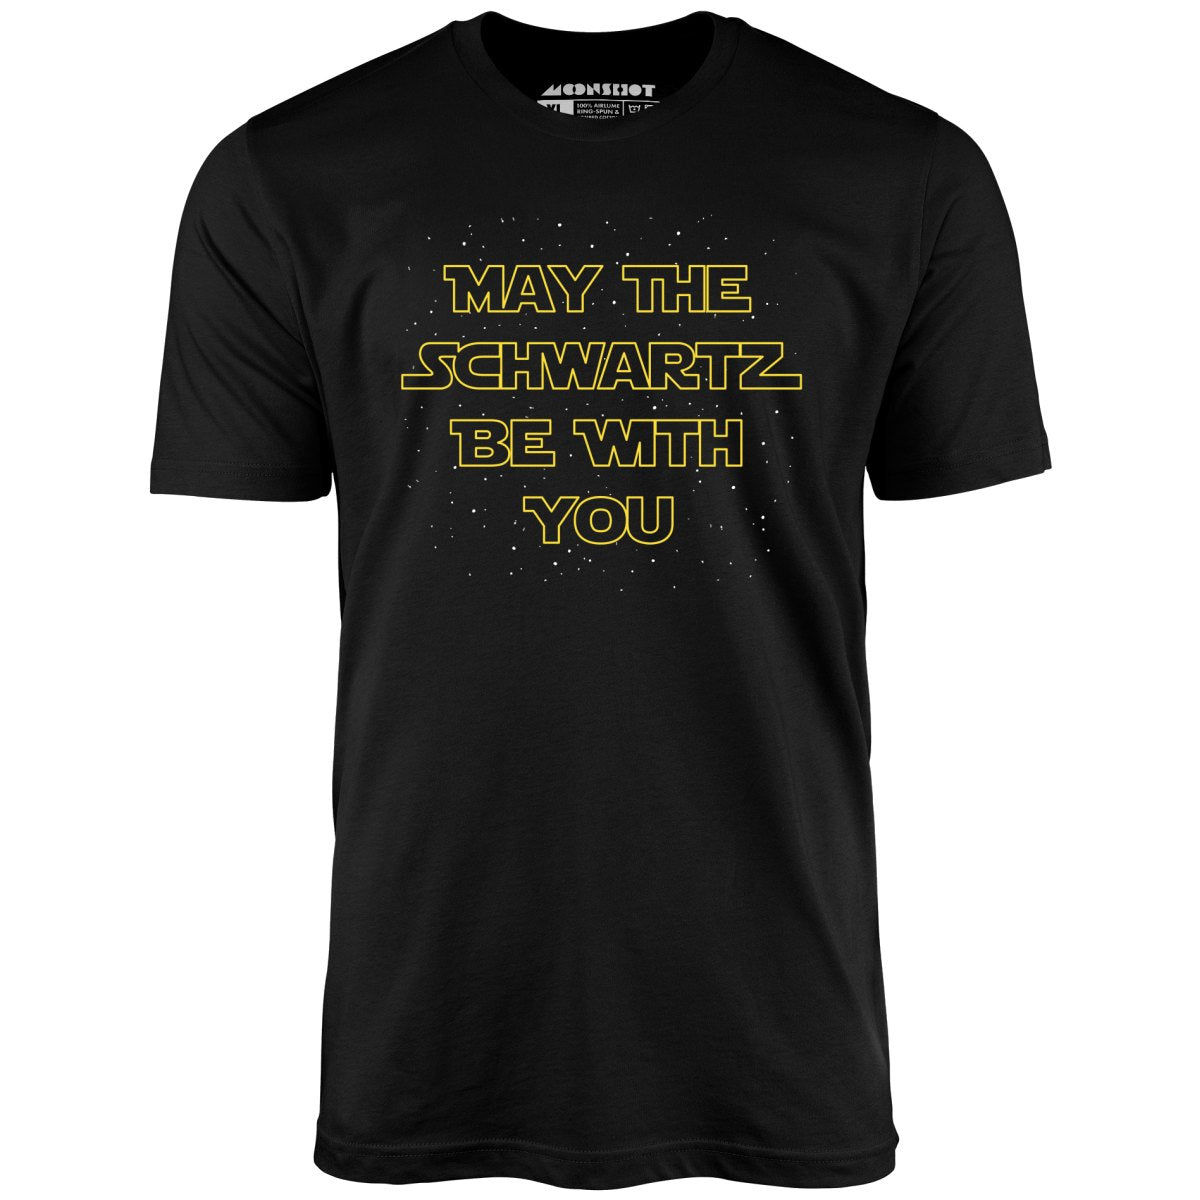 May The Schwartz Be With You - Unisex T-Shirt